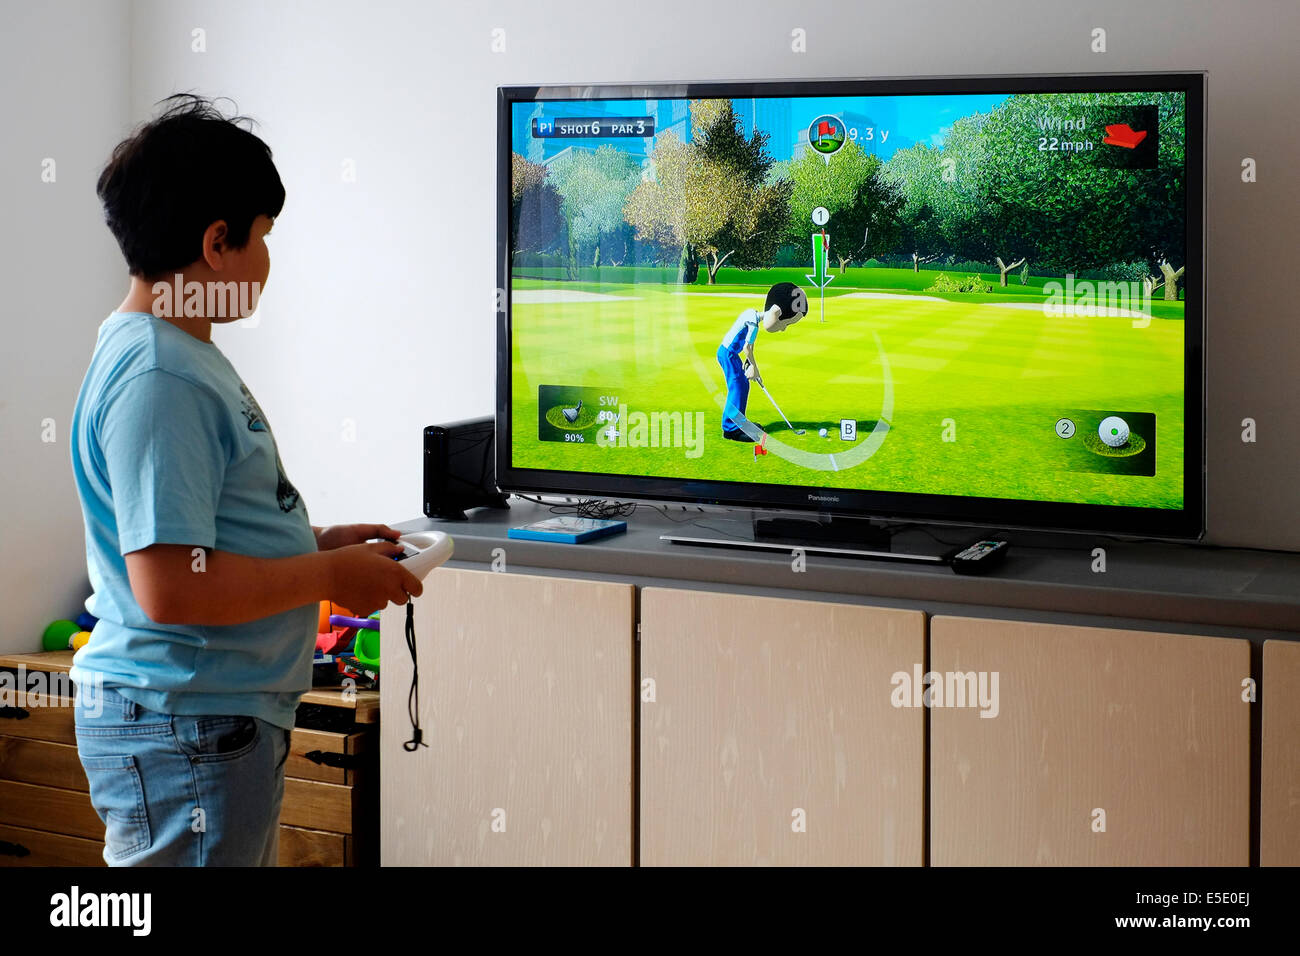 Nintendo Wii High Resolution Stock Photography and Images - Alamy